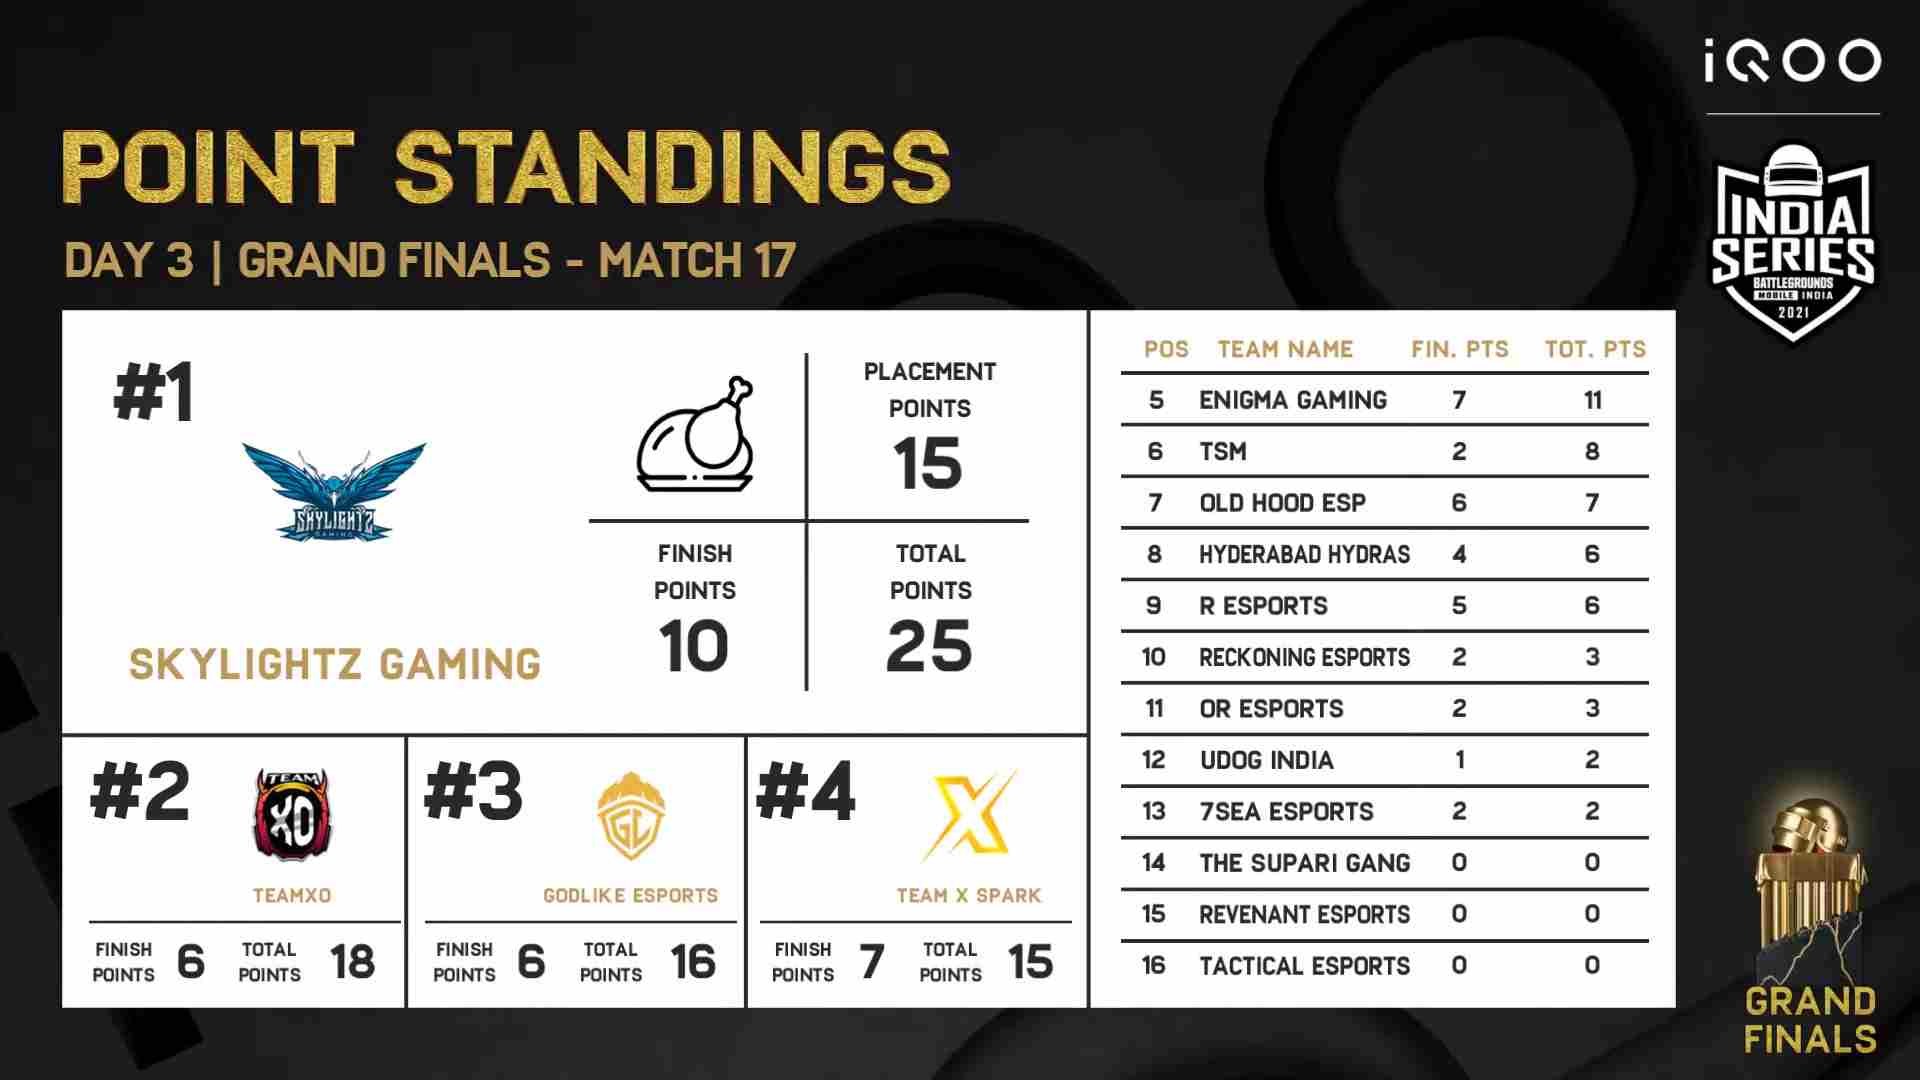 303 Esports on X: 303 Royale: Contenders Grand Finals  Day 1 Overall  Leaderboard Top 3 (6/12 games) 1. @Tactical8Gaming - 68 points 2.  @Nightlygg - 66 points 3. @officialYaho - 66